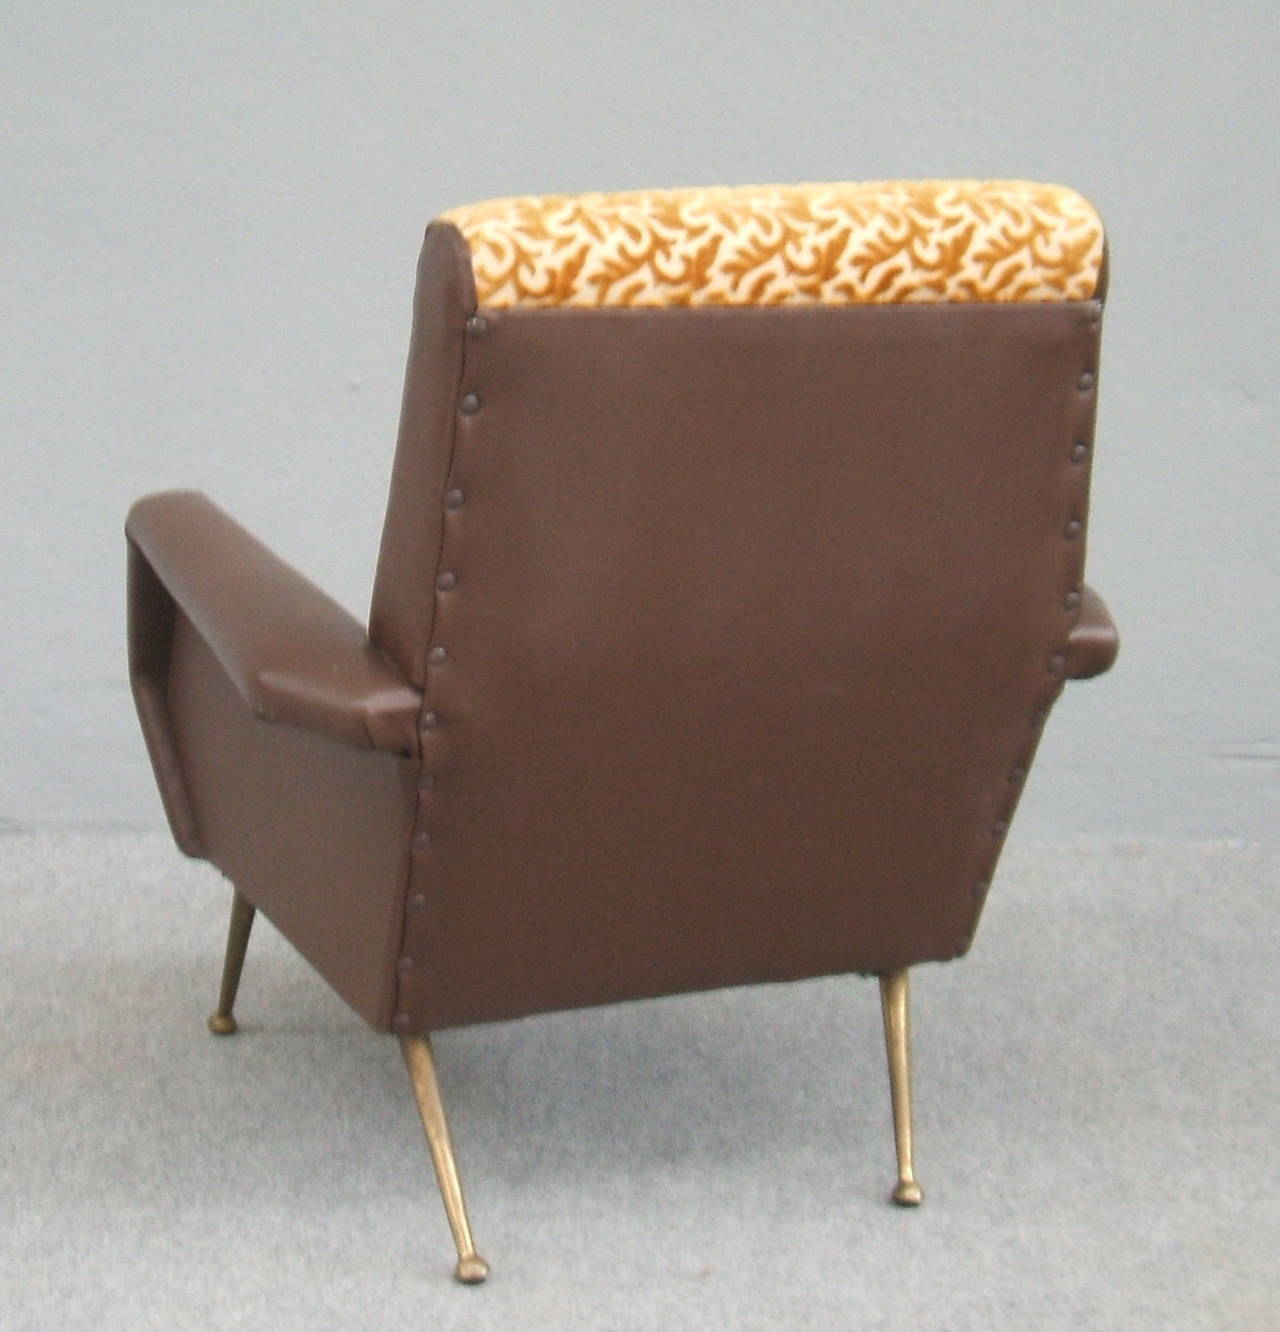 Midcentury Model Armchair In Excellent Condition For Sale In Piacenza, Italy